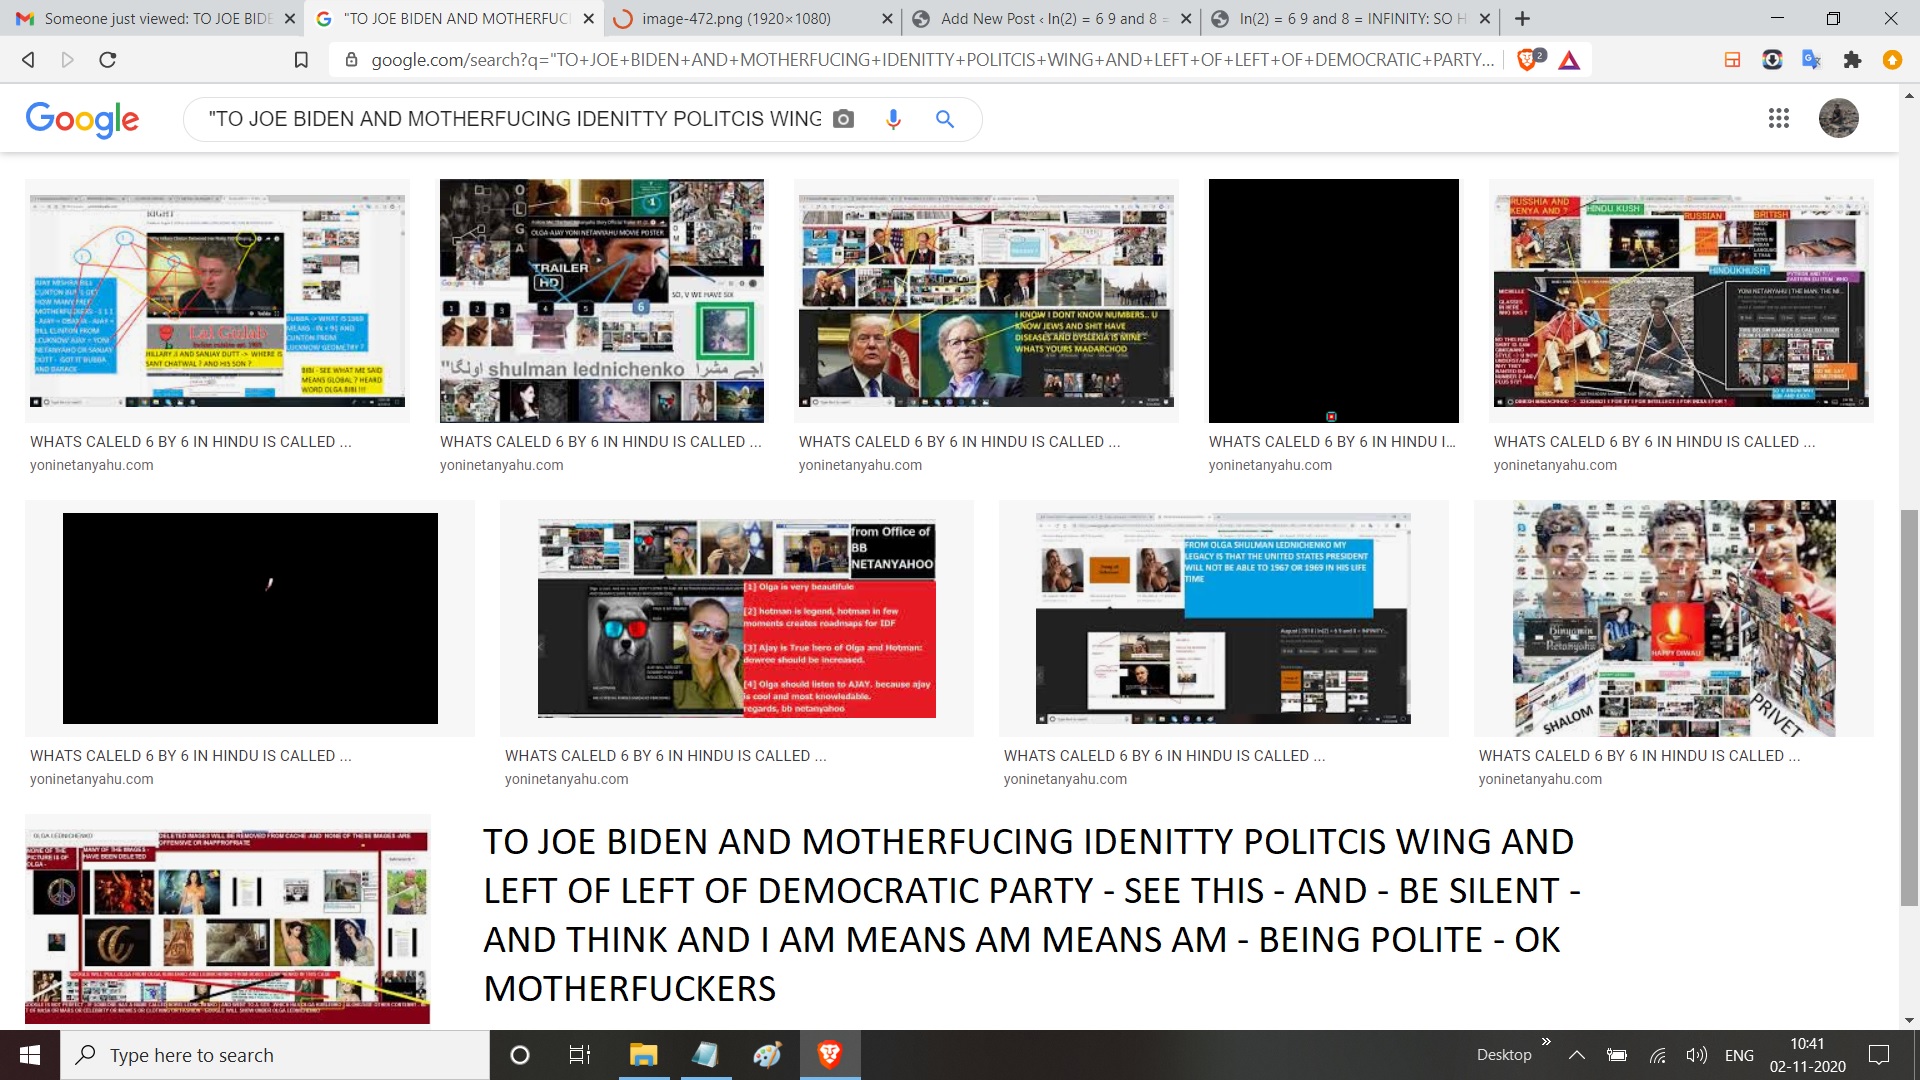 TO JOE BIDEN AND MOTHERFUCING IDENITTY POLITCIS WING AND LEFT OF LEFT OF DEMOCRATIC PARTY - SEE THIS - AND - BE SILENT - AND THINK AND I AM MEANS AM MEANS AM - BEING POLITE - OK MOTHERFUCKERS